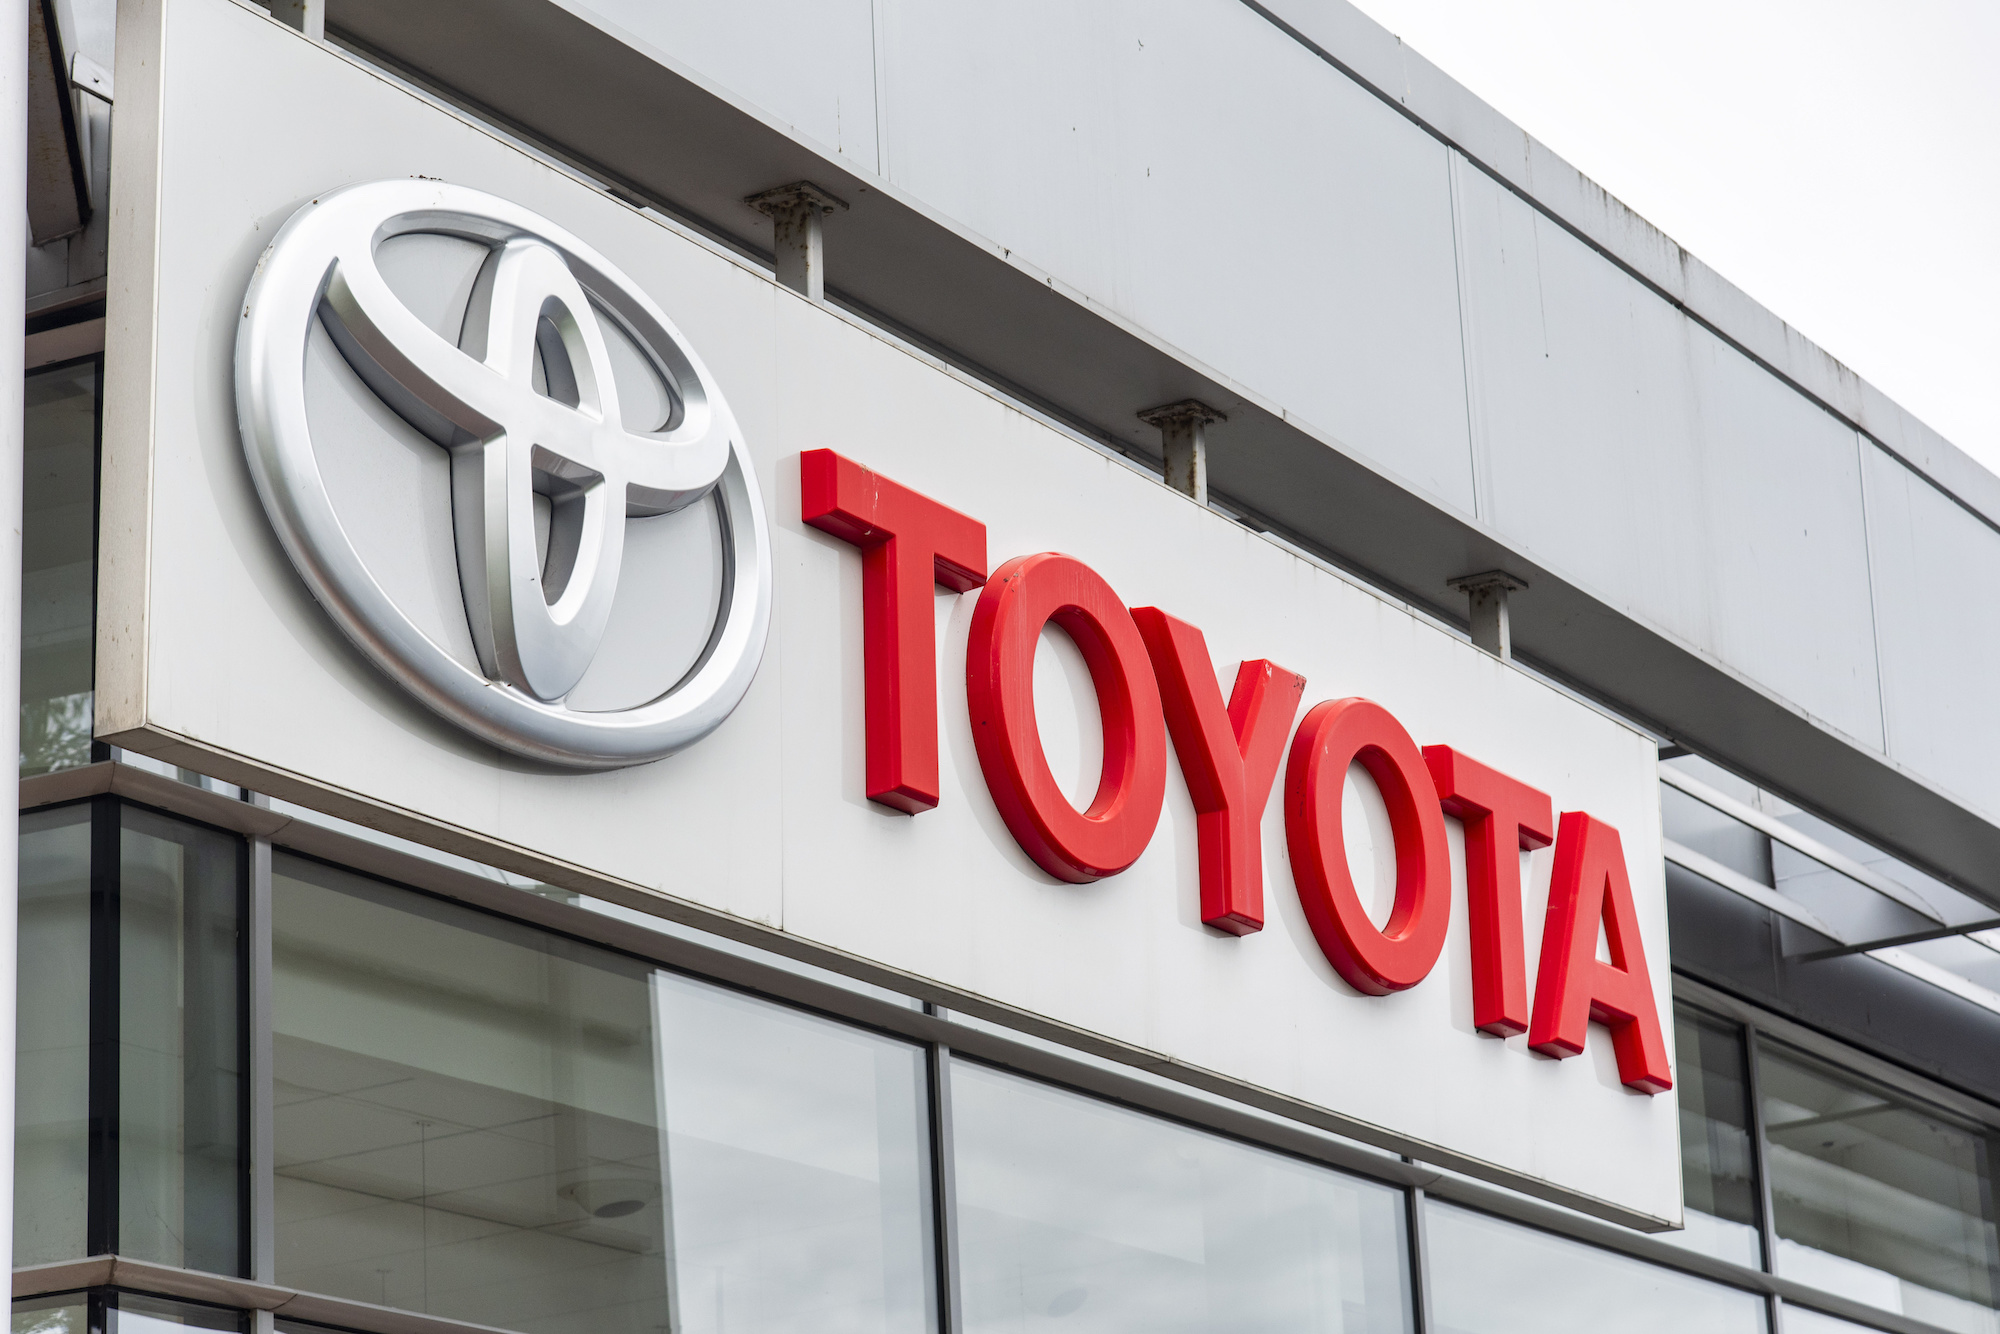 Toyota company logo seen on one of their car dealerships showrooms in London